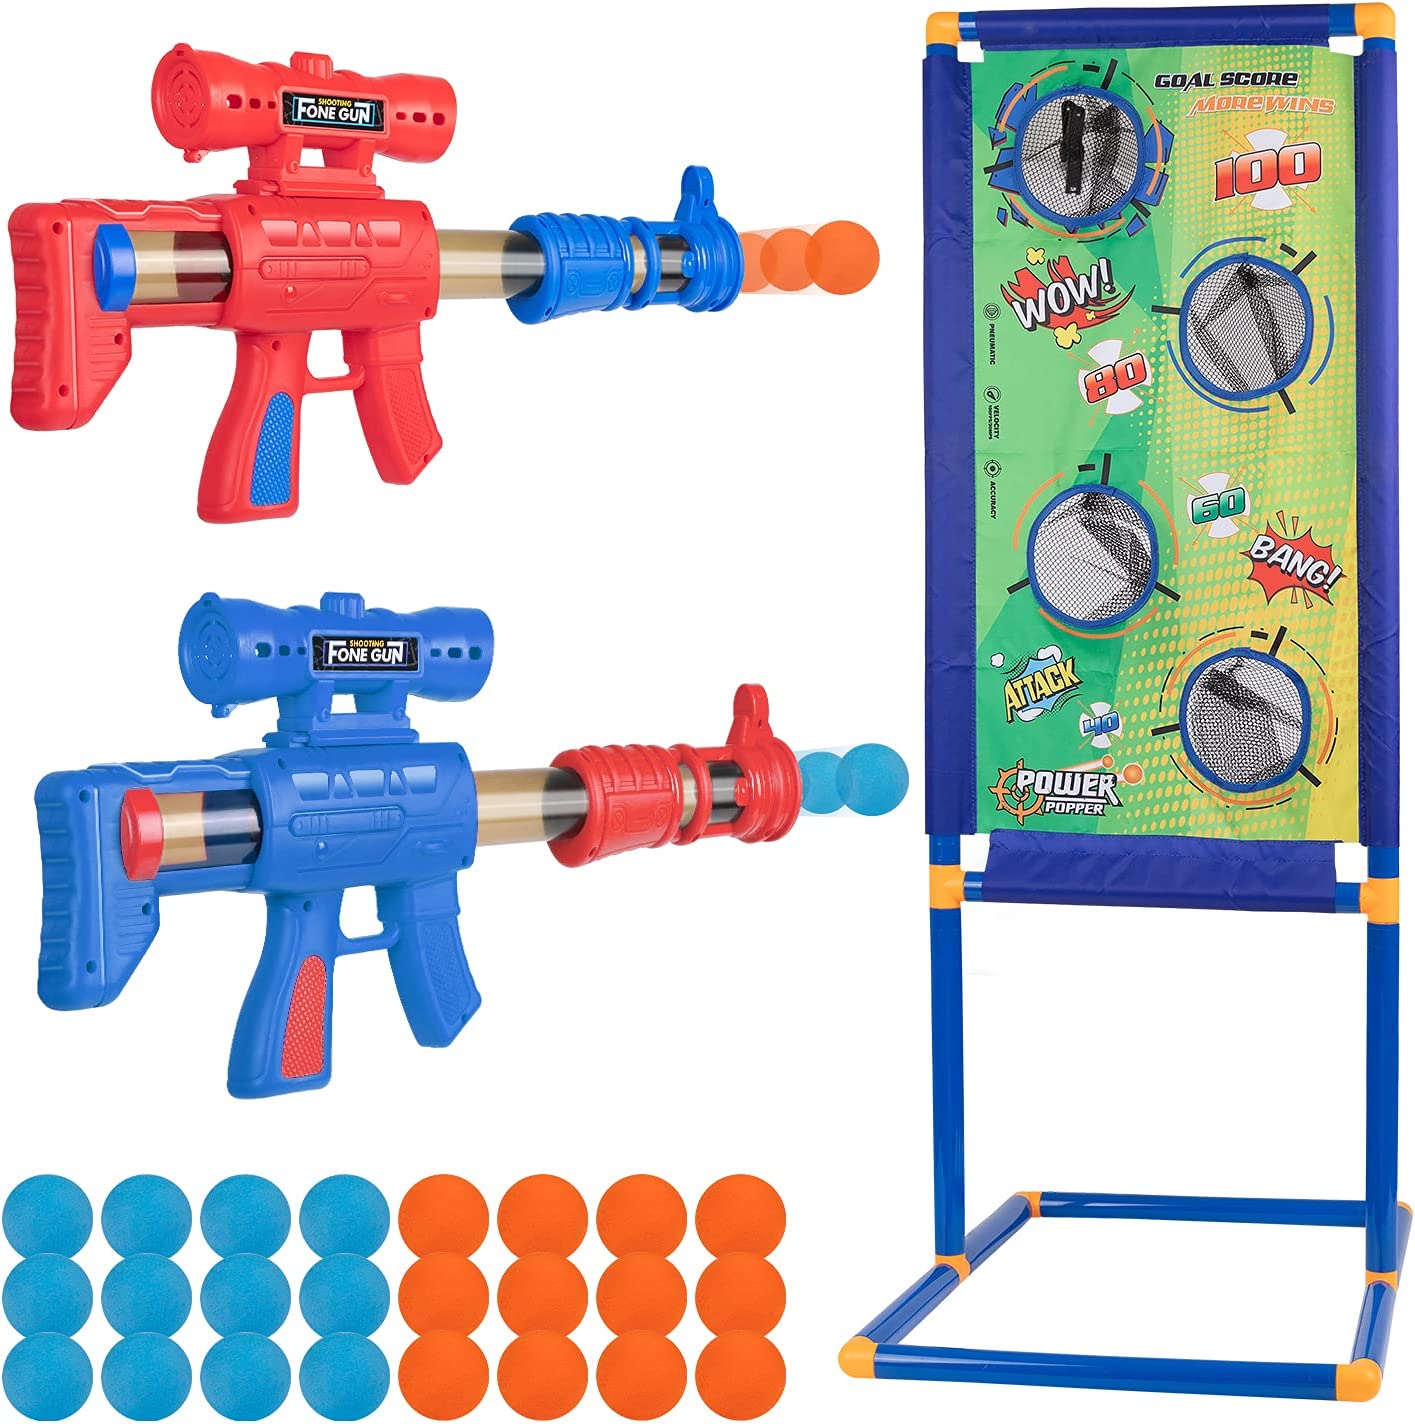 Shooting Games Toys For Age 10 Year Old Boys, Kids Toy